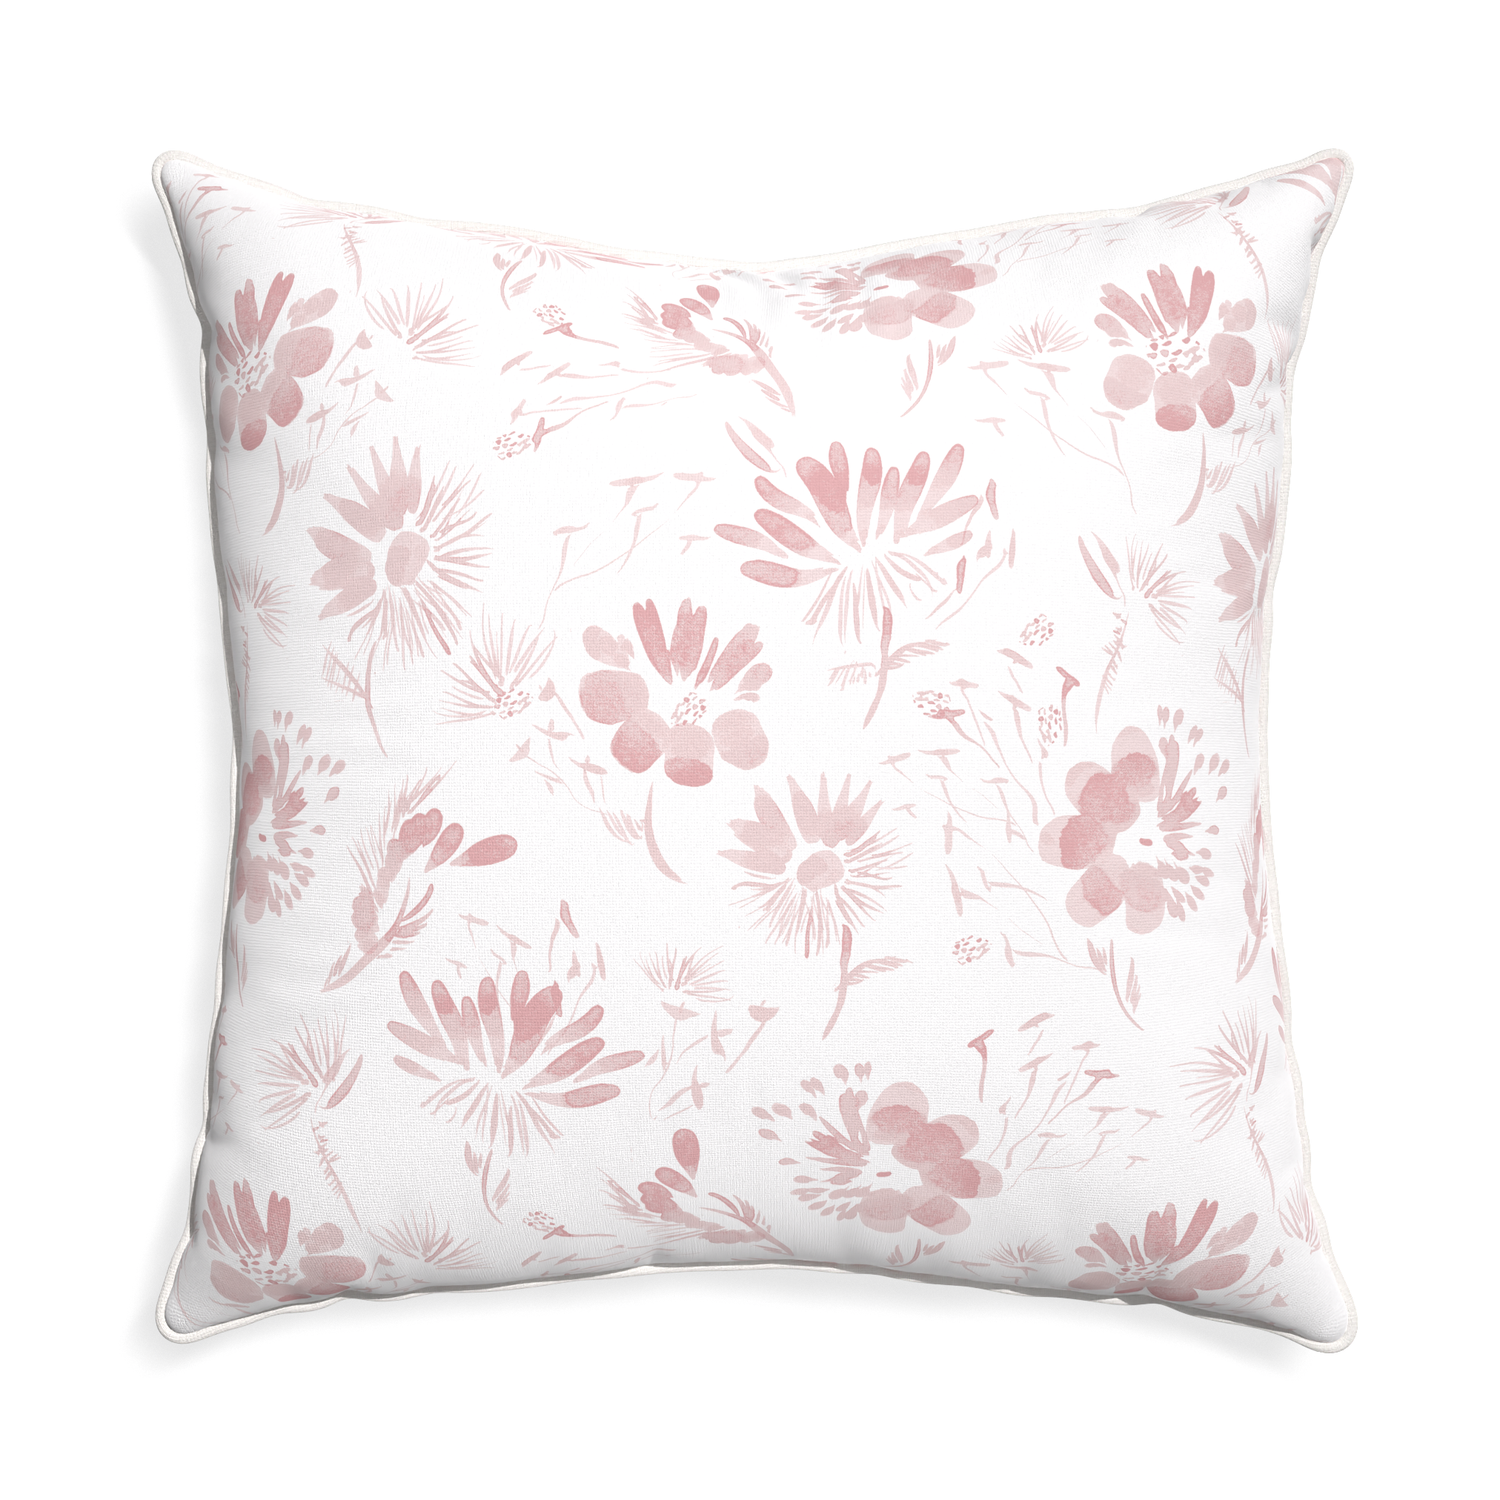 Euro-sham blake custom pink floralpillow with snow piping on white background